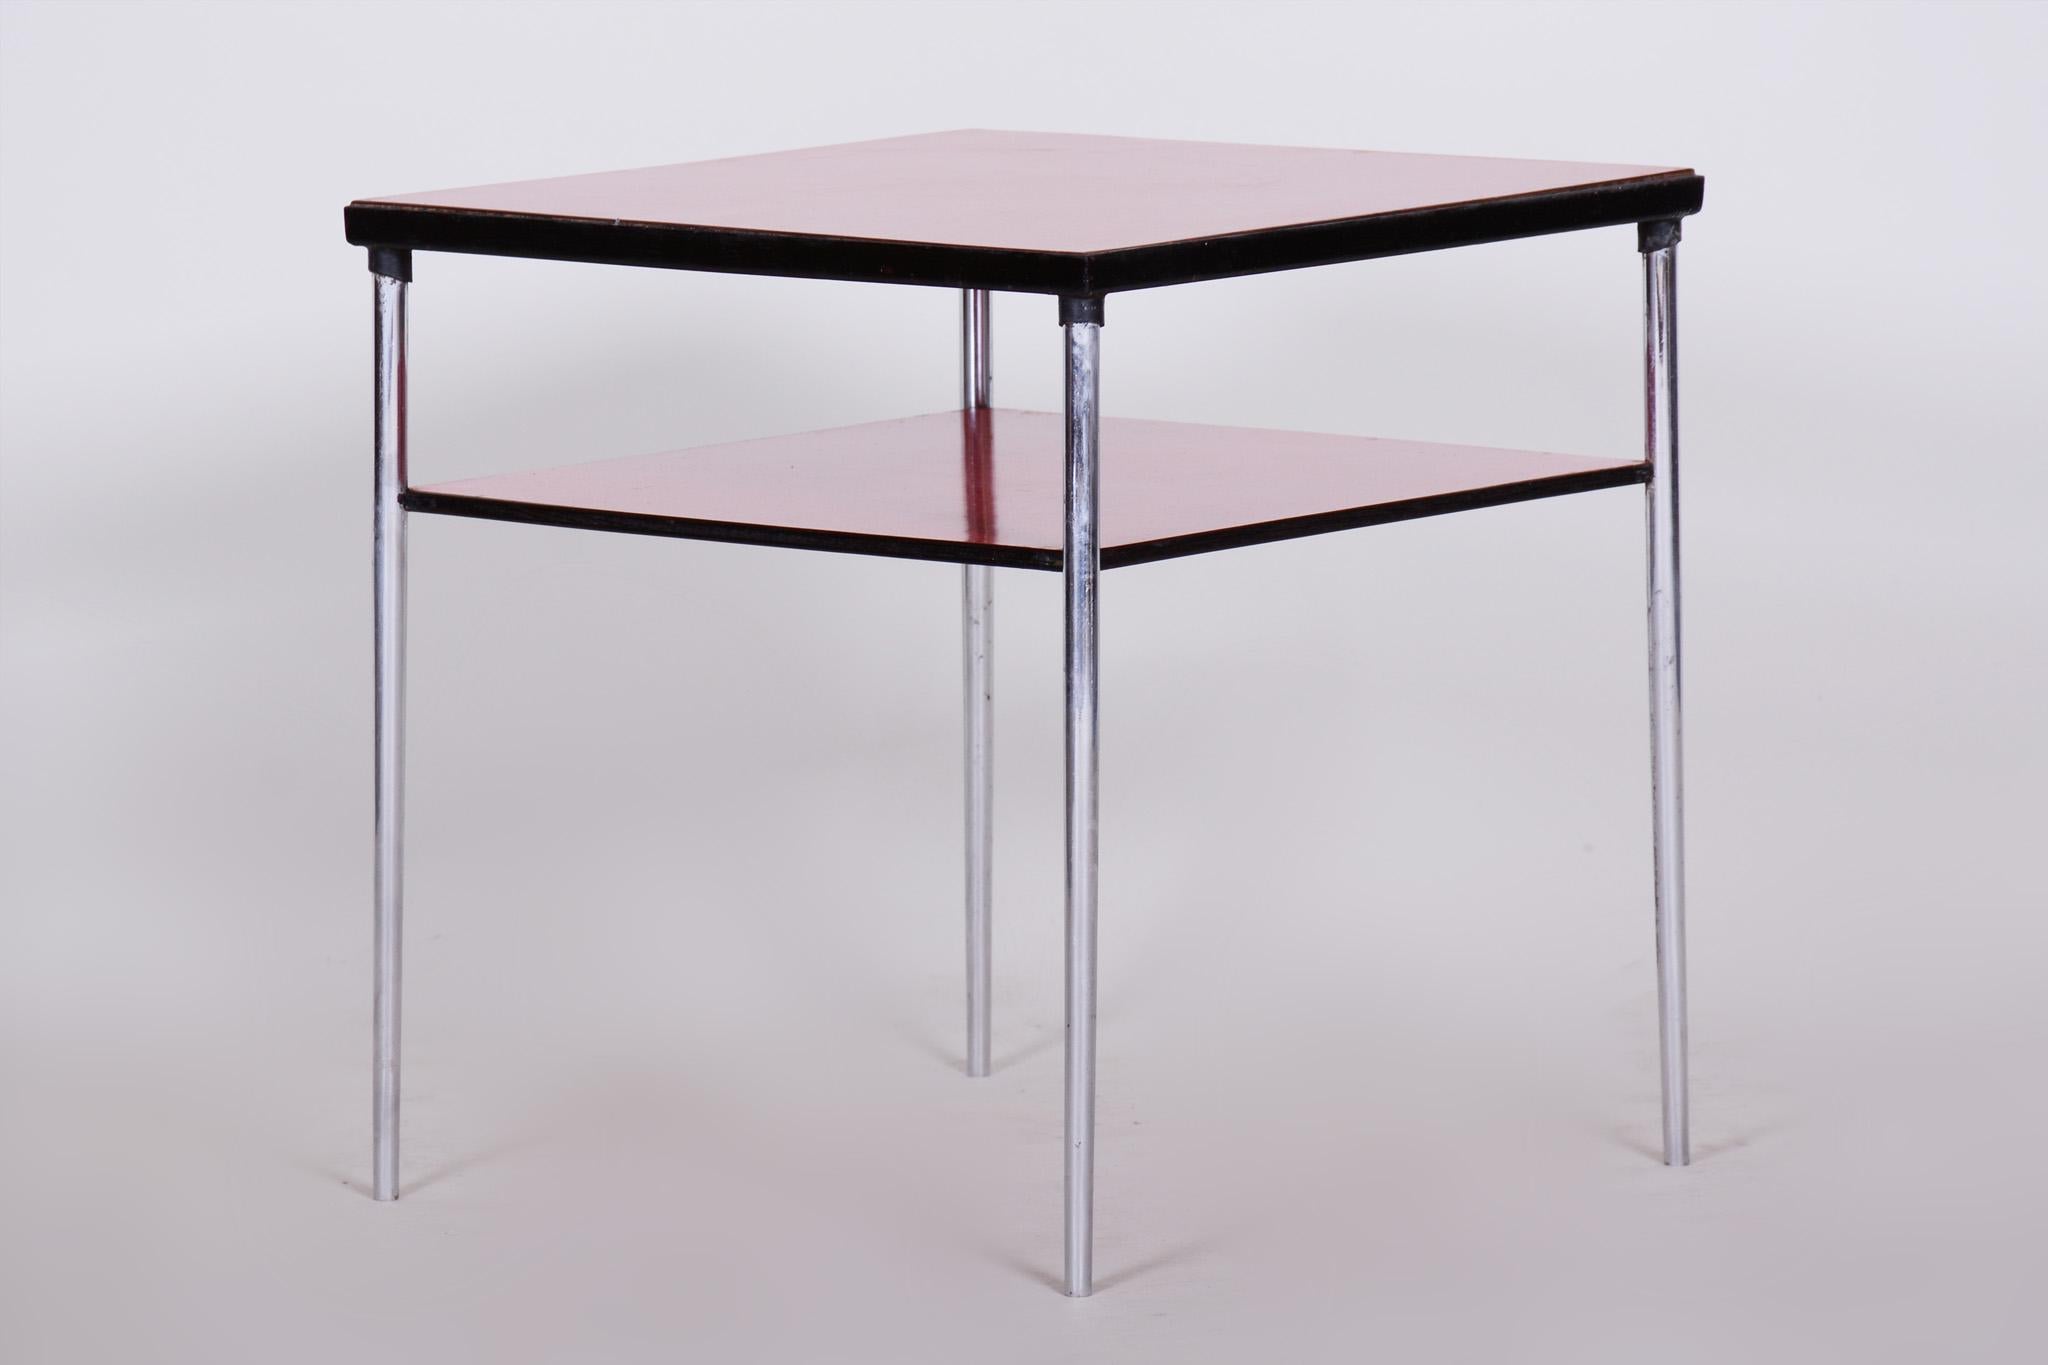 20th Century Czech Square Umakart Bauhaus Table, Chrome-Plated Steel, 1930s In Good Condition For Sale In Horomerice, CZ